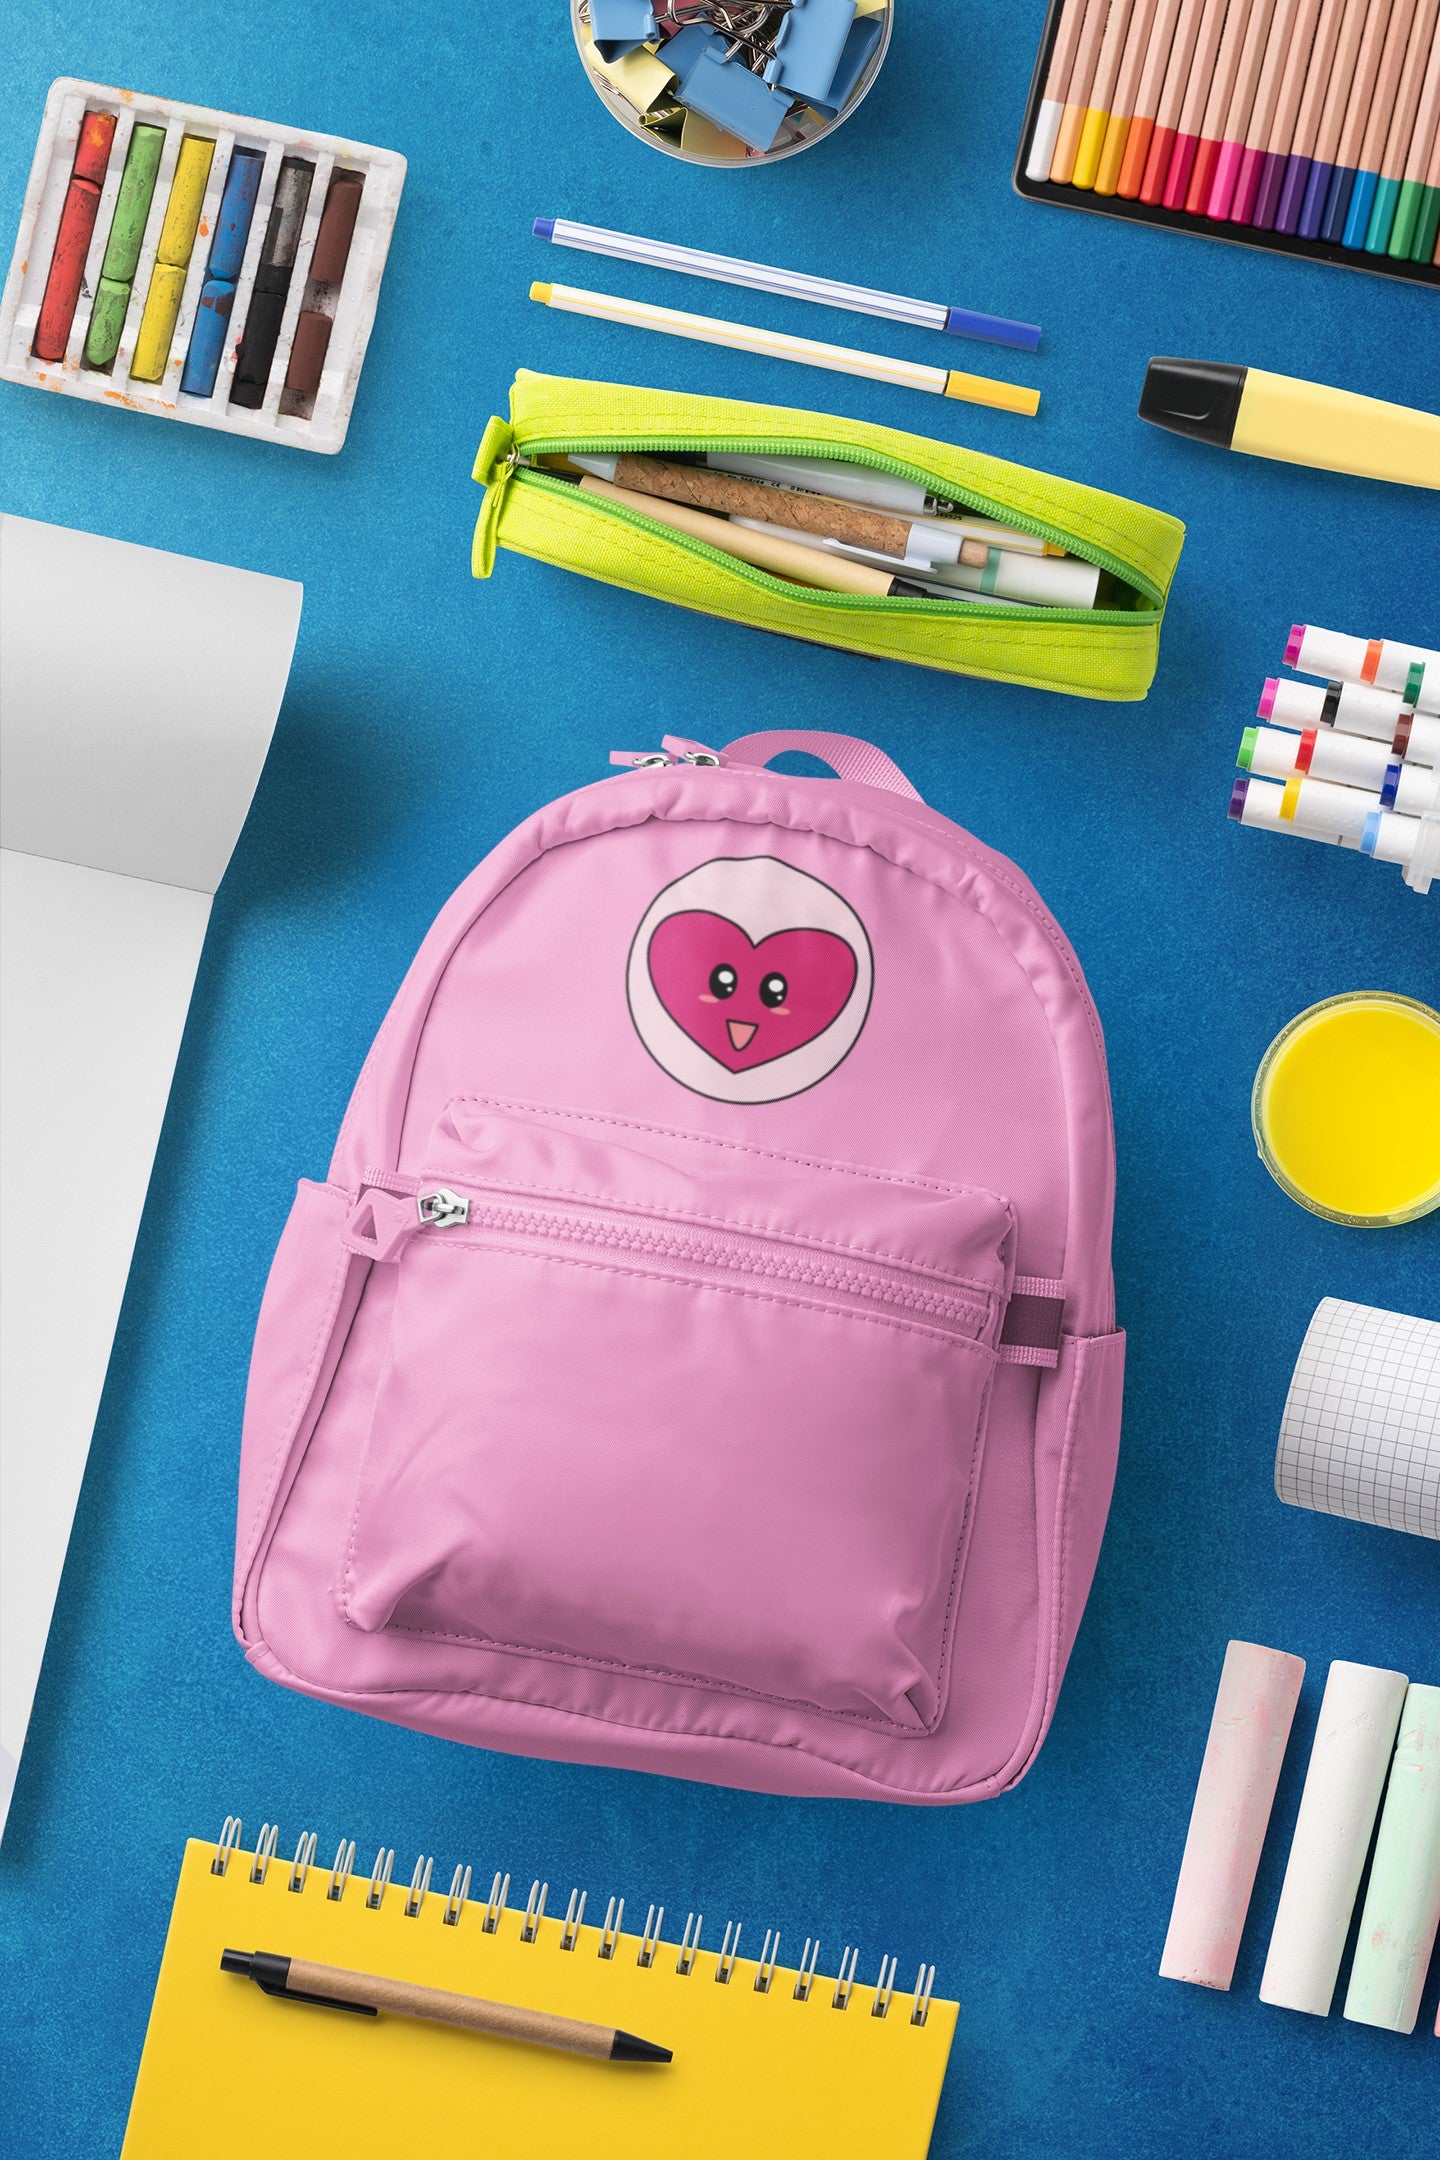 Tackle the Clutter: Organizing Backpacks and School Supplies